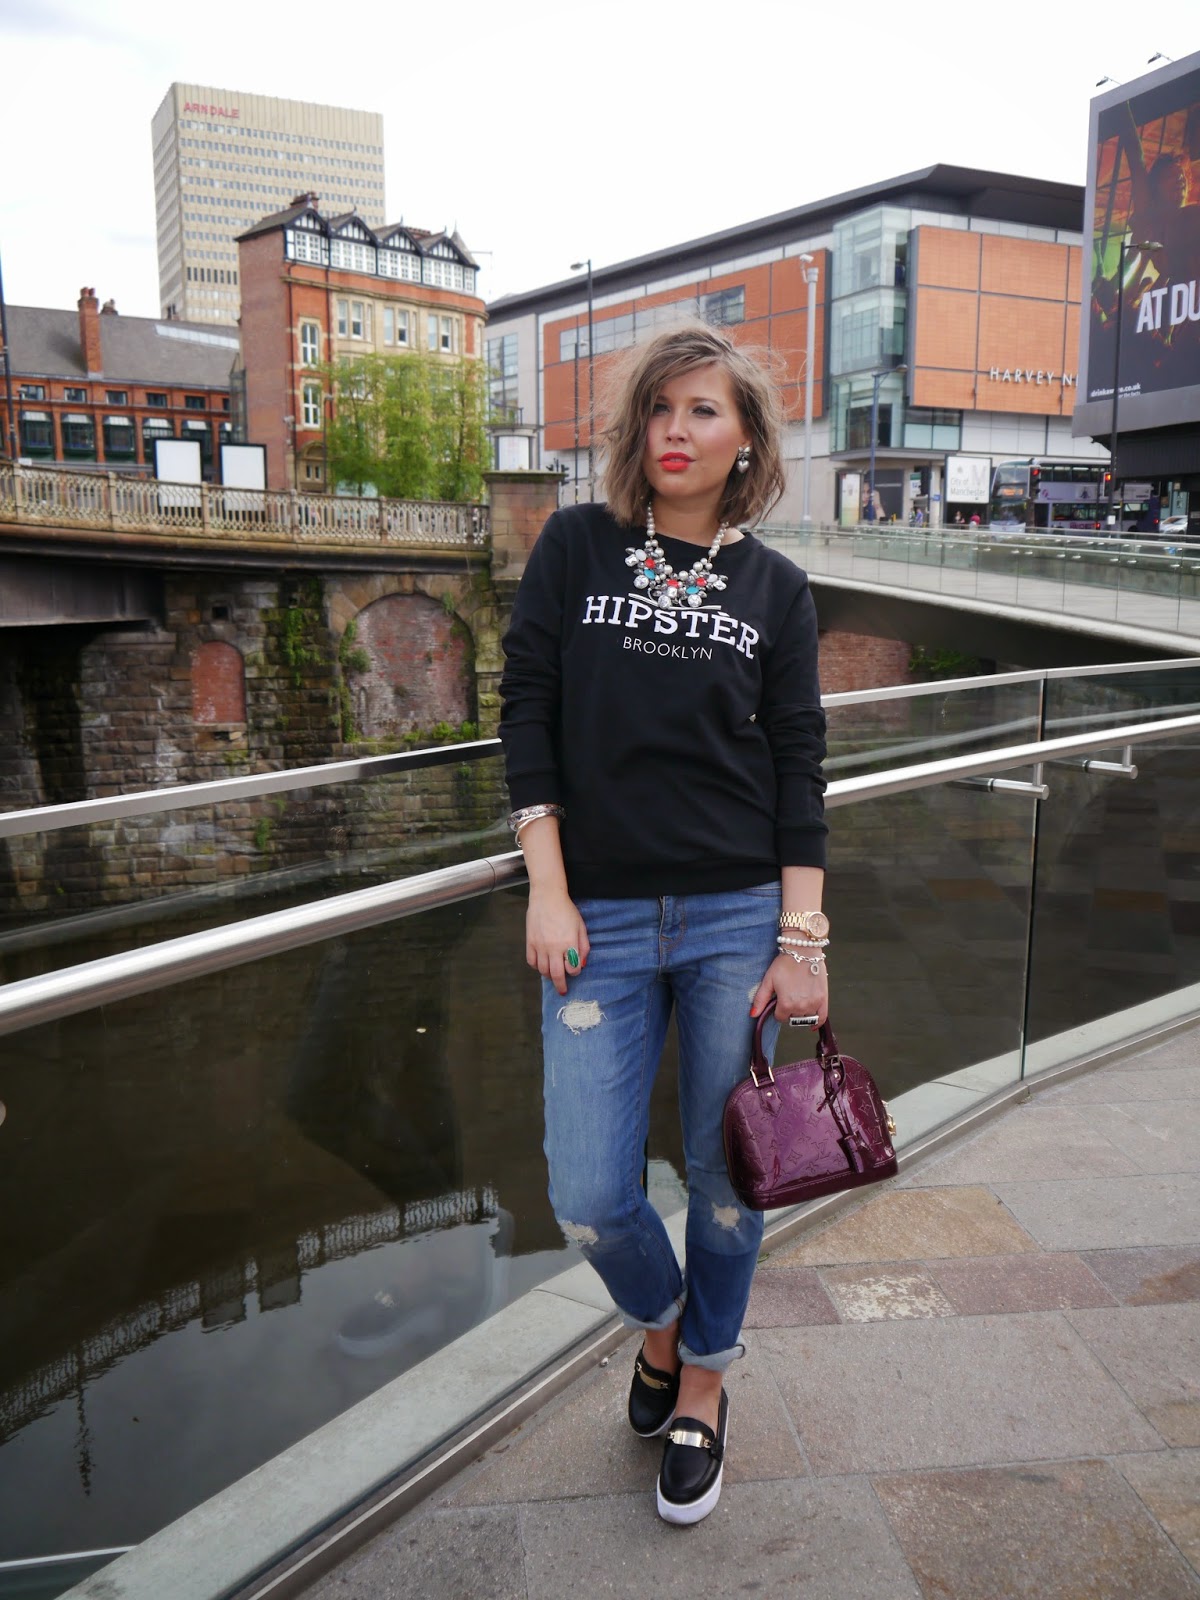 Glamorous Hipster in Manchester - Irena D World